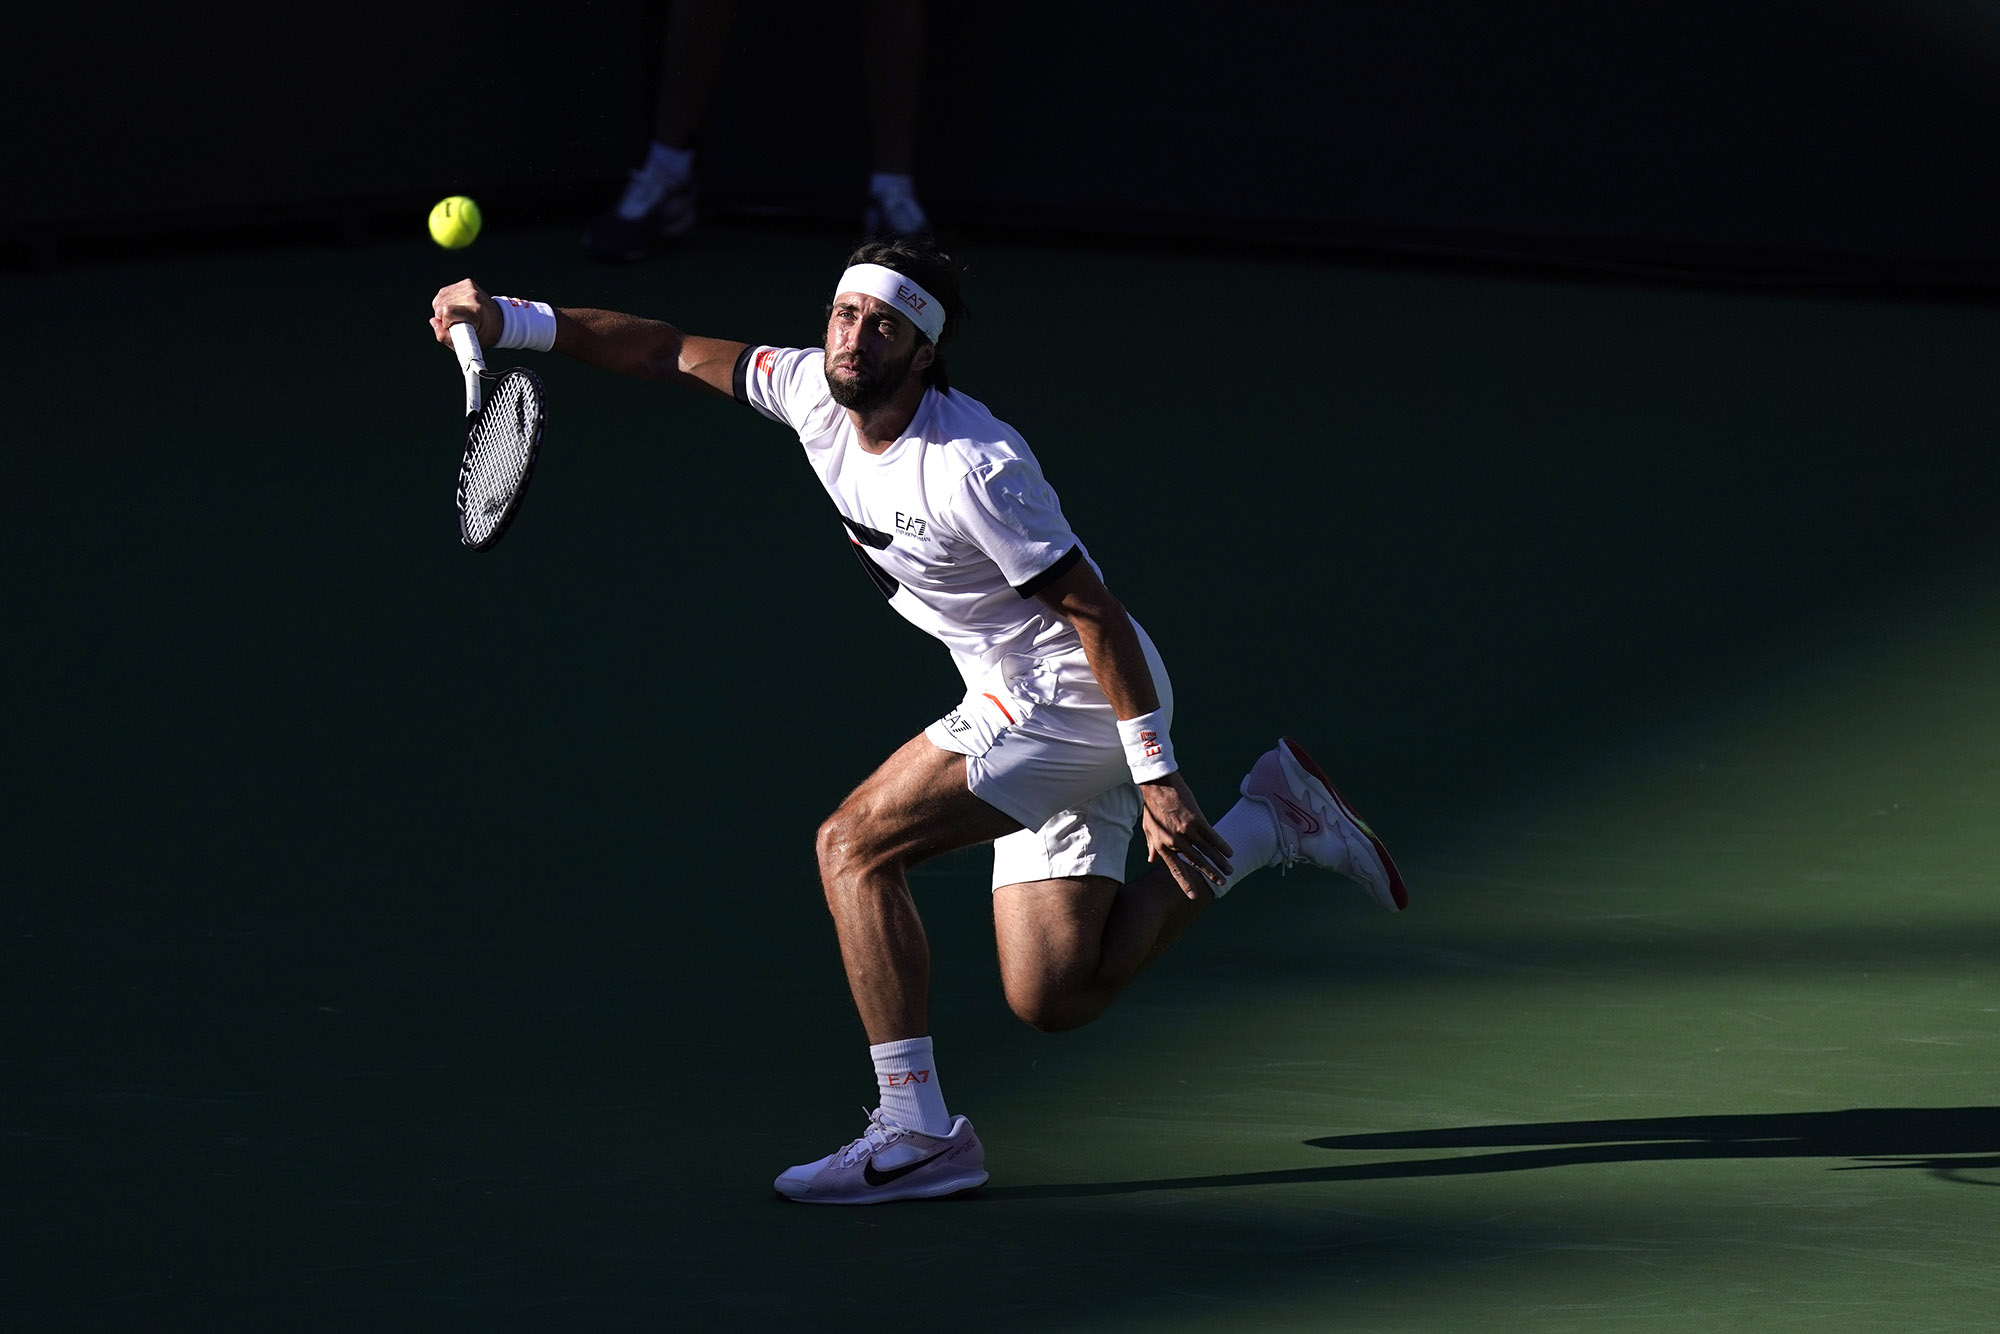 Basilashvili, Norrie Reach Indian Wells Final Without Top 25